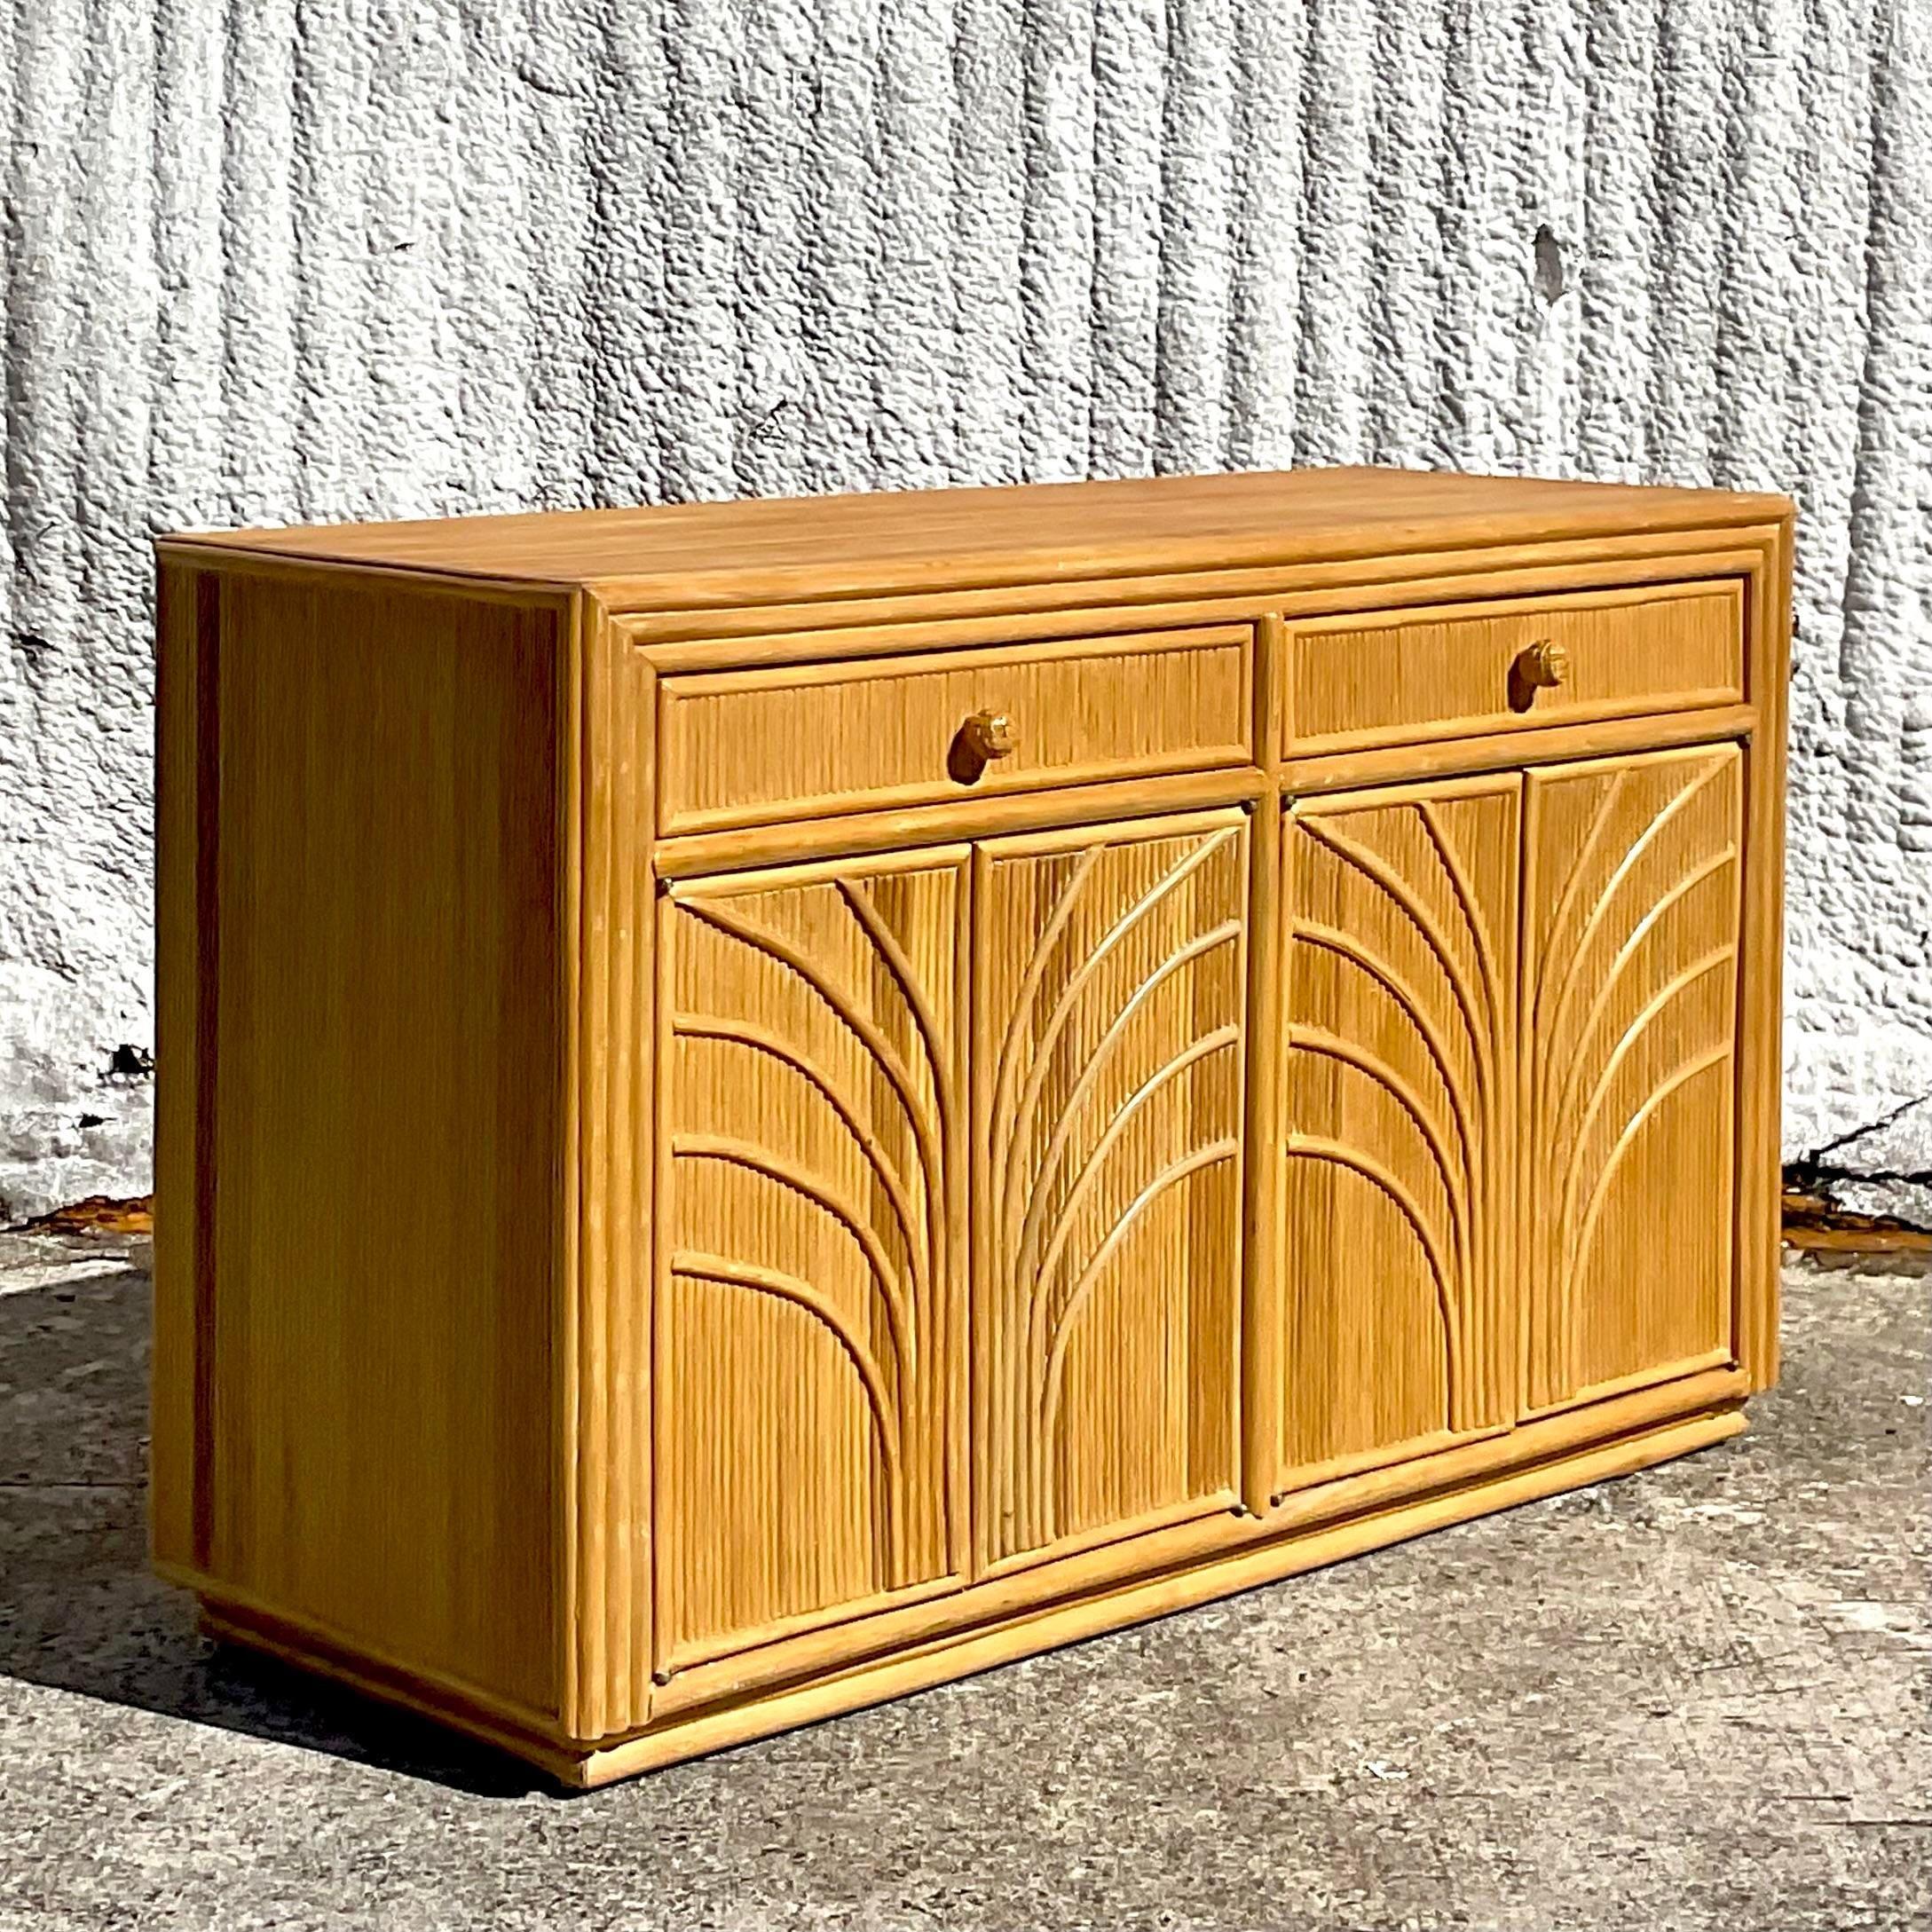 A fabulous vintage Coastal sideboard. A chic pencil reed cabinet with the iconic Palm Tree design on the door fronts. Lots of great interior storage and two drawers. Acquired from a Palm Beach estate.